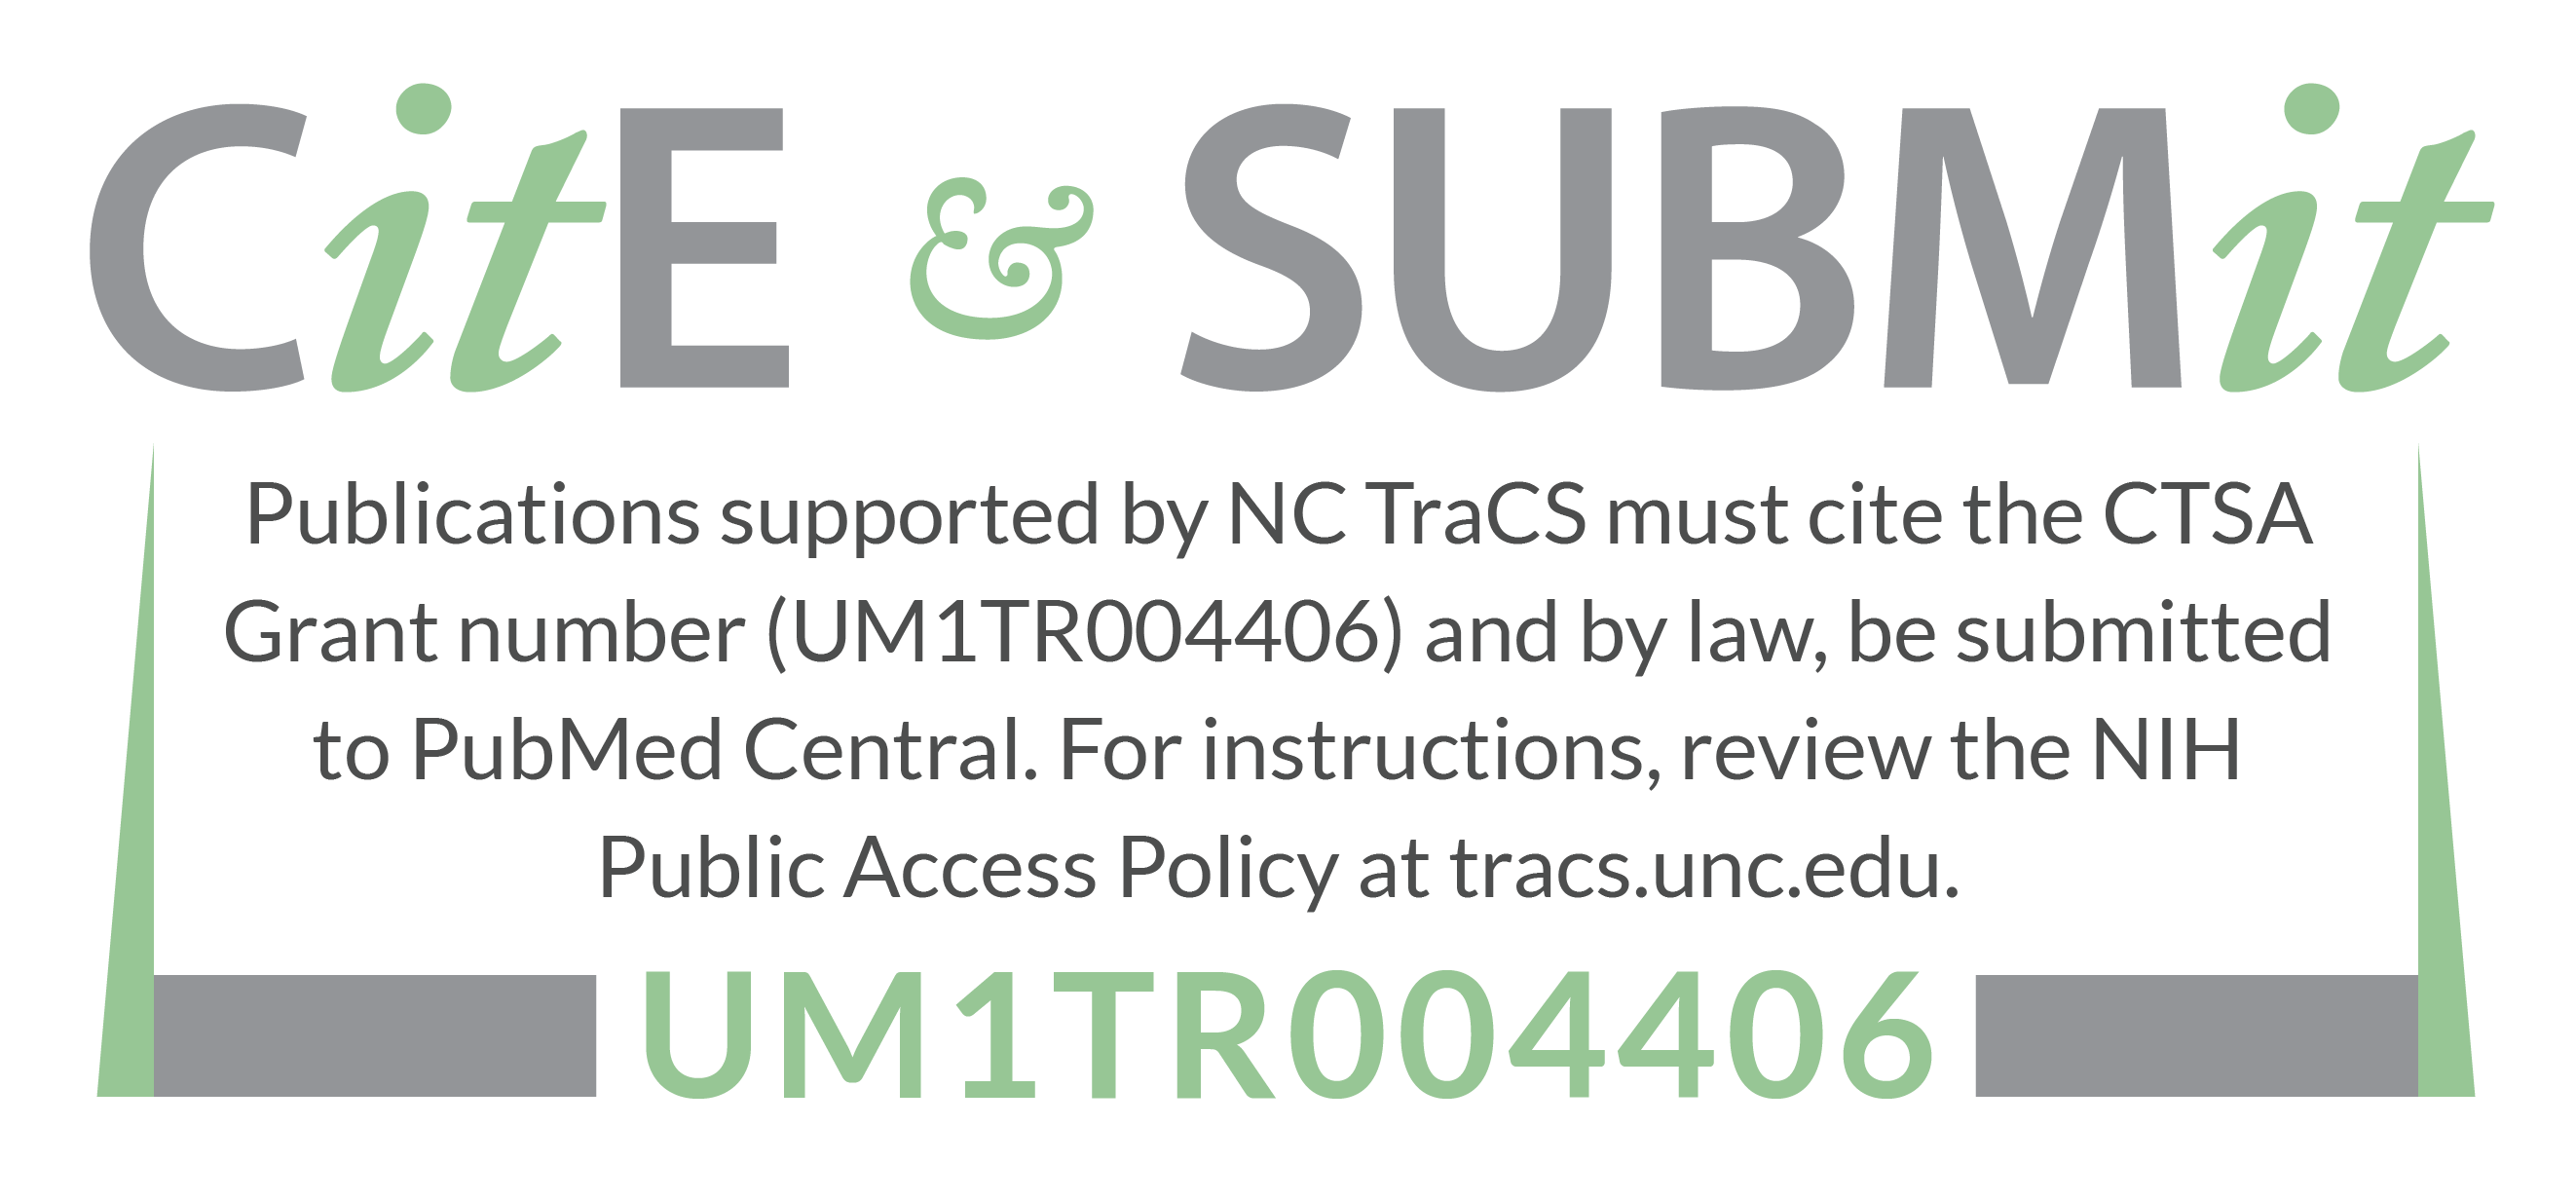 Cite and Submit graphic - All publications, press releases, or other documents that result from the utilization of any NC TraCS Institute resources are required to credit the CTSA grant and comply with NIH Public Access Policy (submission to PubMed Central).